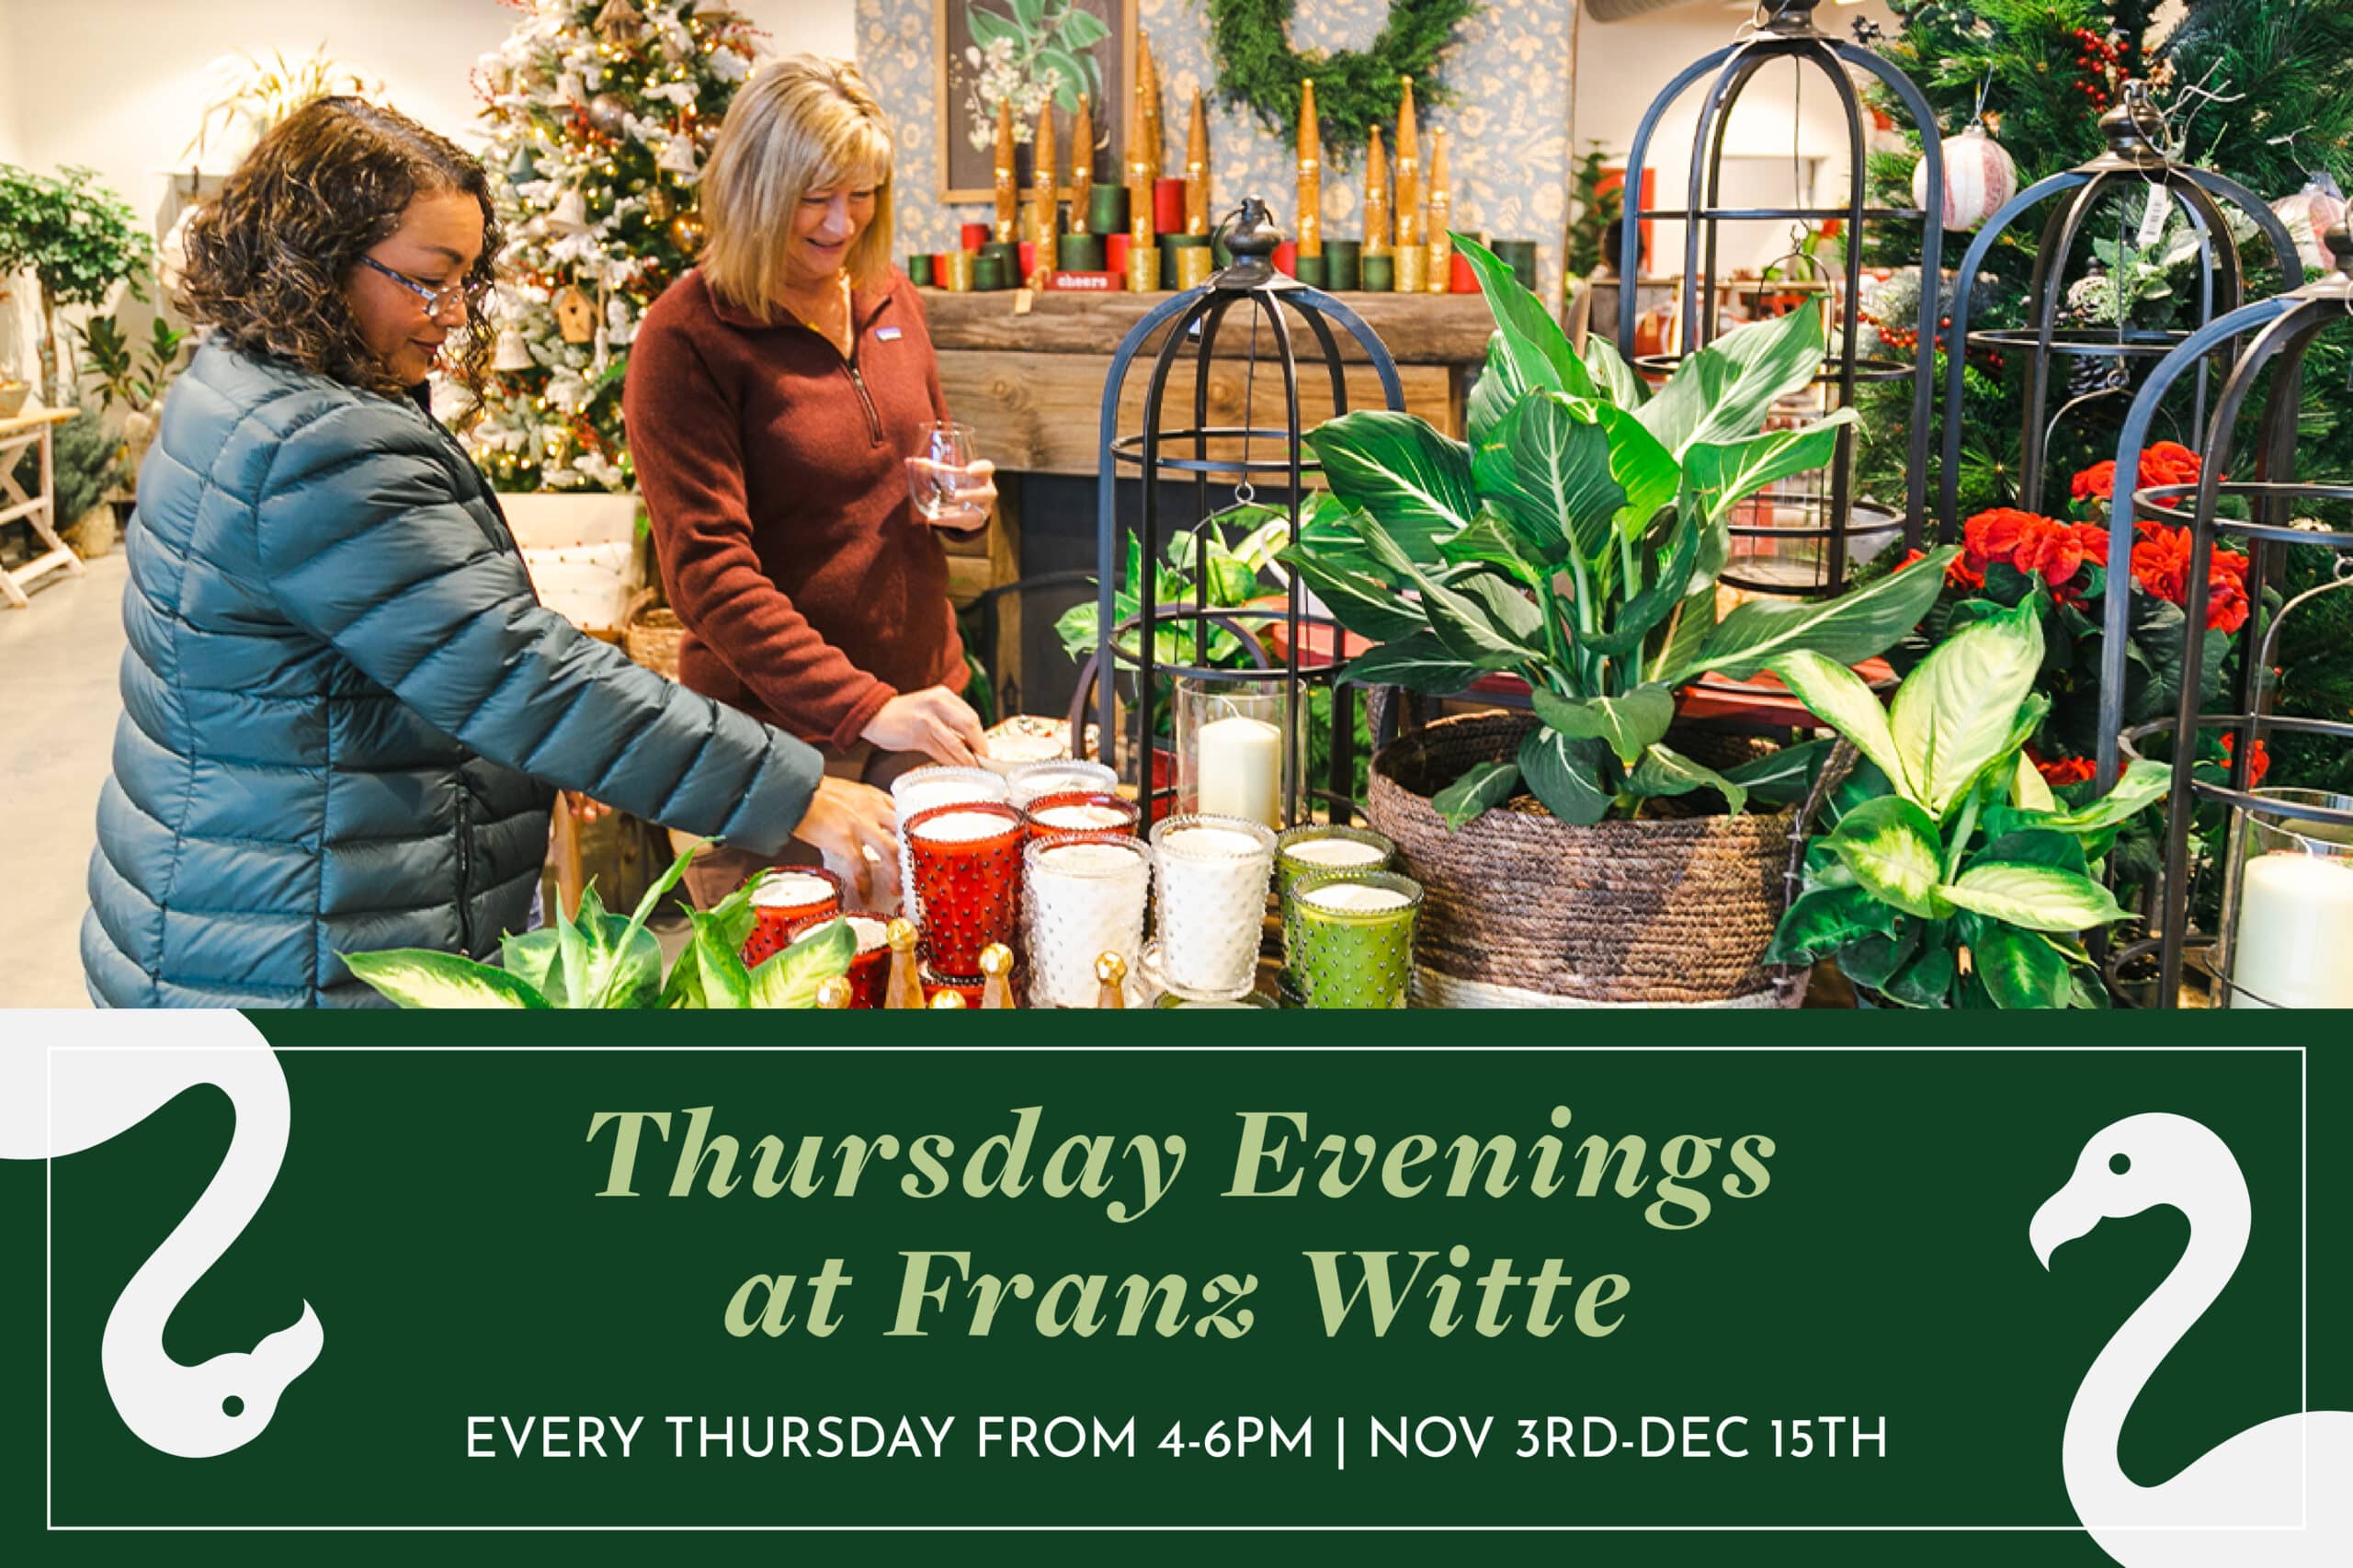 Photo of two ladies shopping in Franz Witte garden center. Text states, "Thursday Evenings at Franz Witte every Thursday from 4 PM - 6 PM November 3 - December 15"